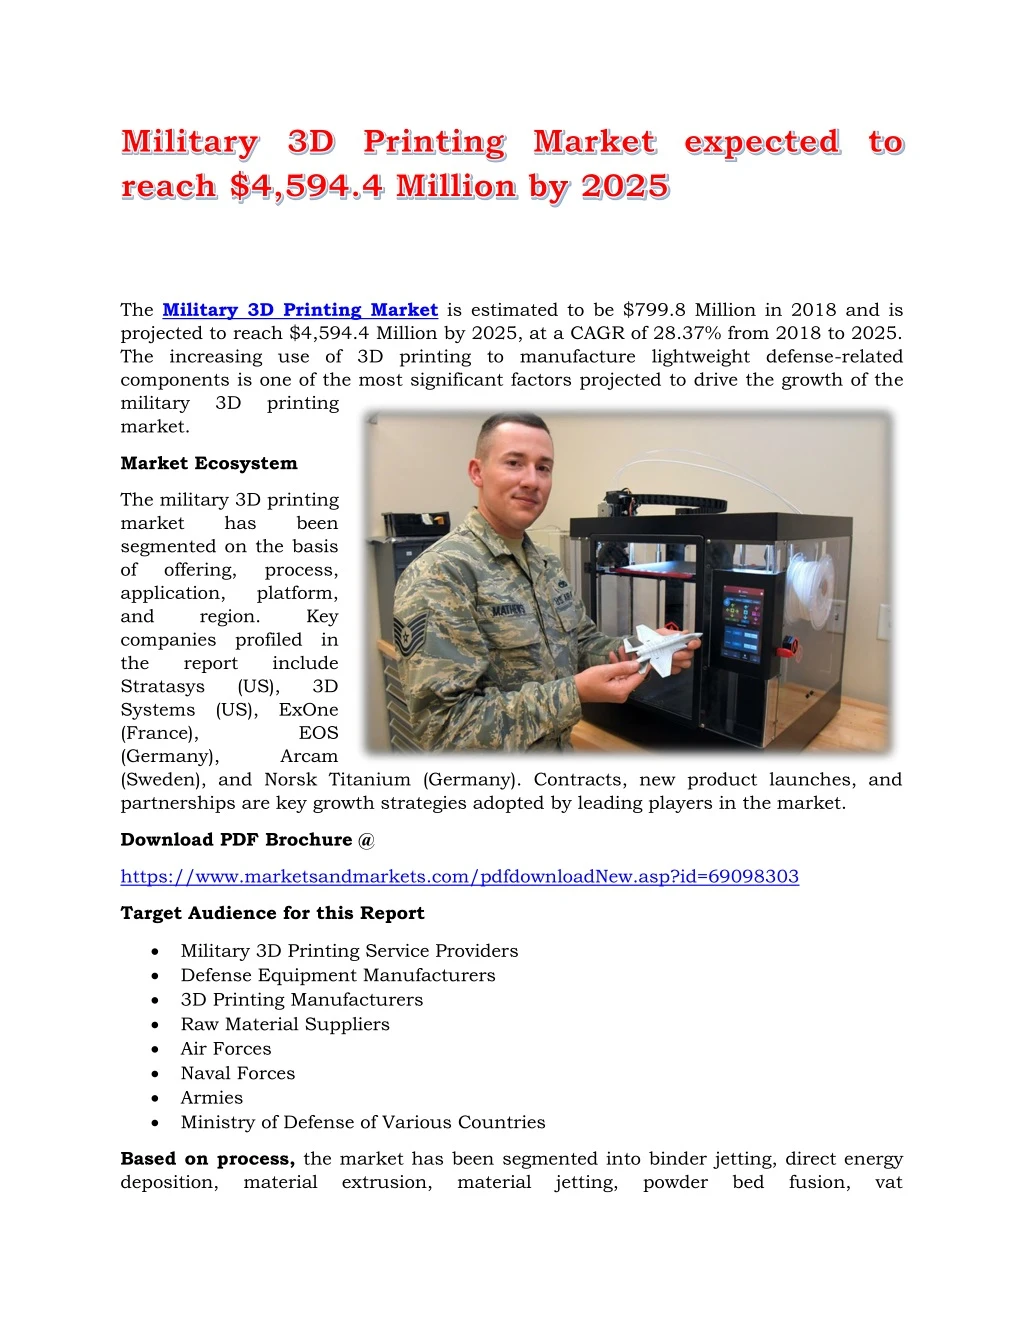 the military 3d printing market is estimated